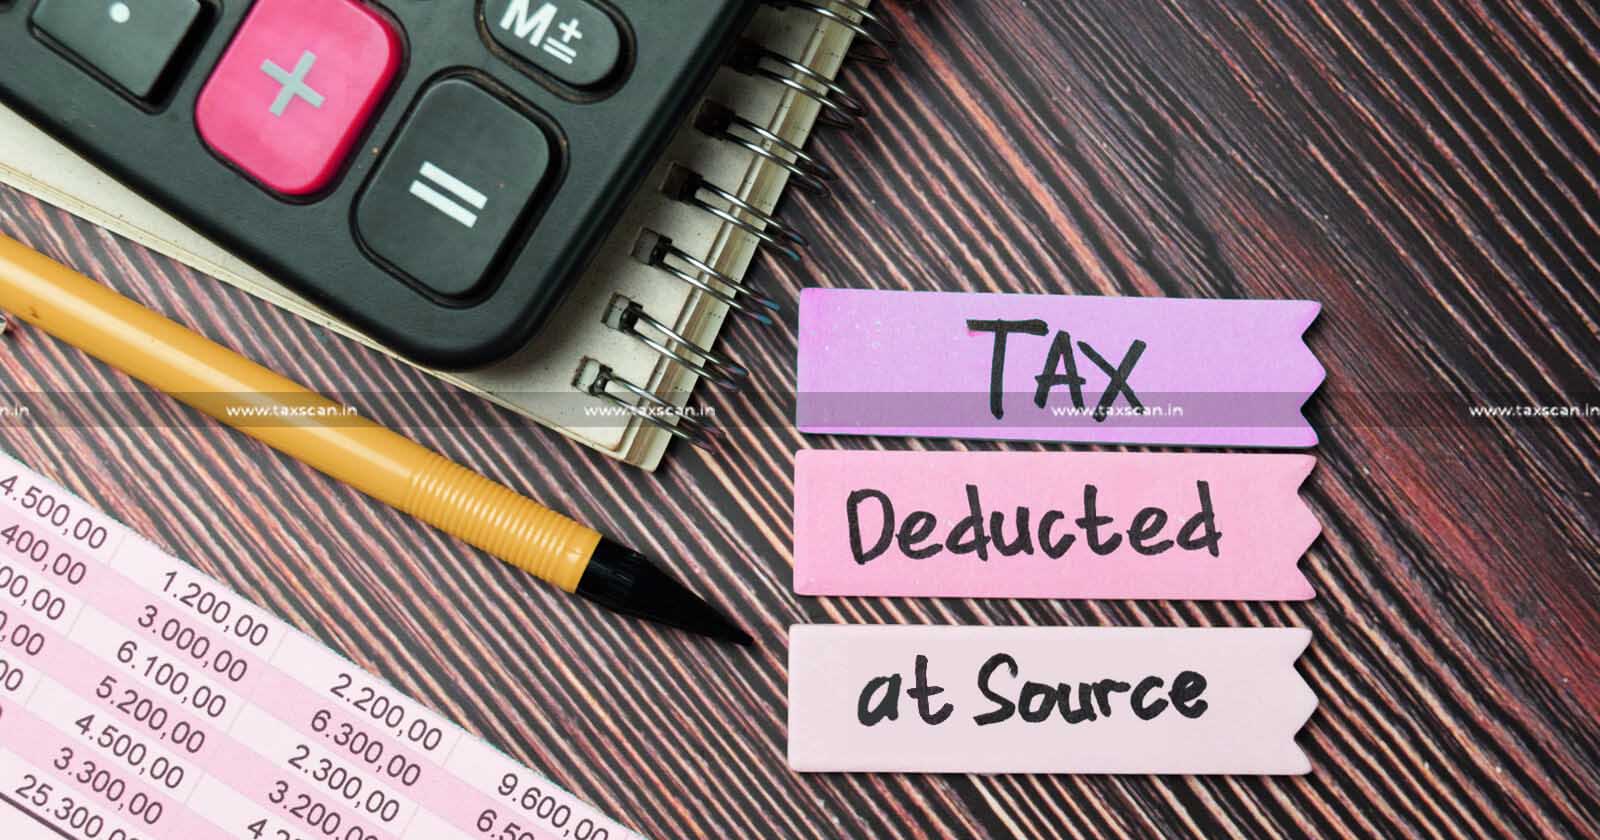 Service Tax not Payable - Service Tax - TDS Paid - Tax Deducted At Source - Cestat - Excise - Customs - Cestat News - Tax News - TDS Paid from Assessee's own Account - Own Account - TAXSCAN